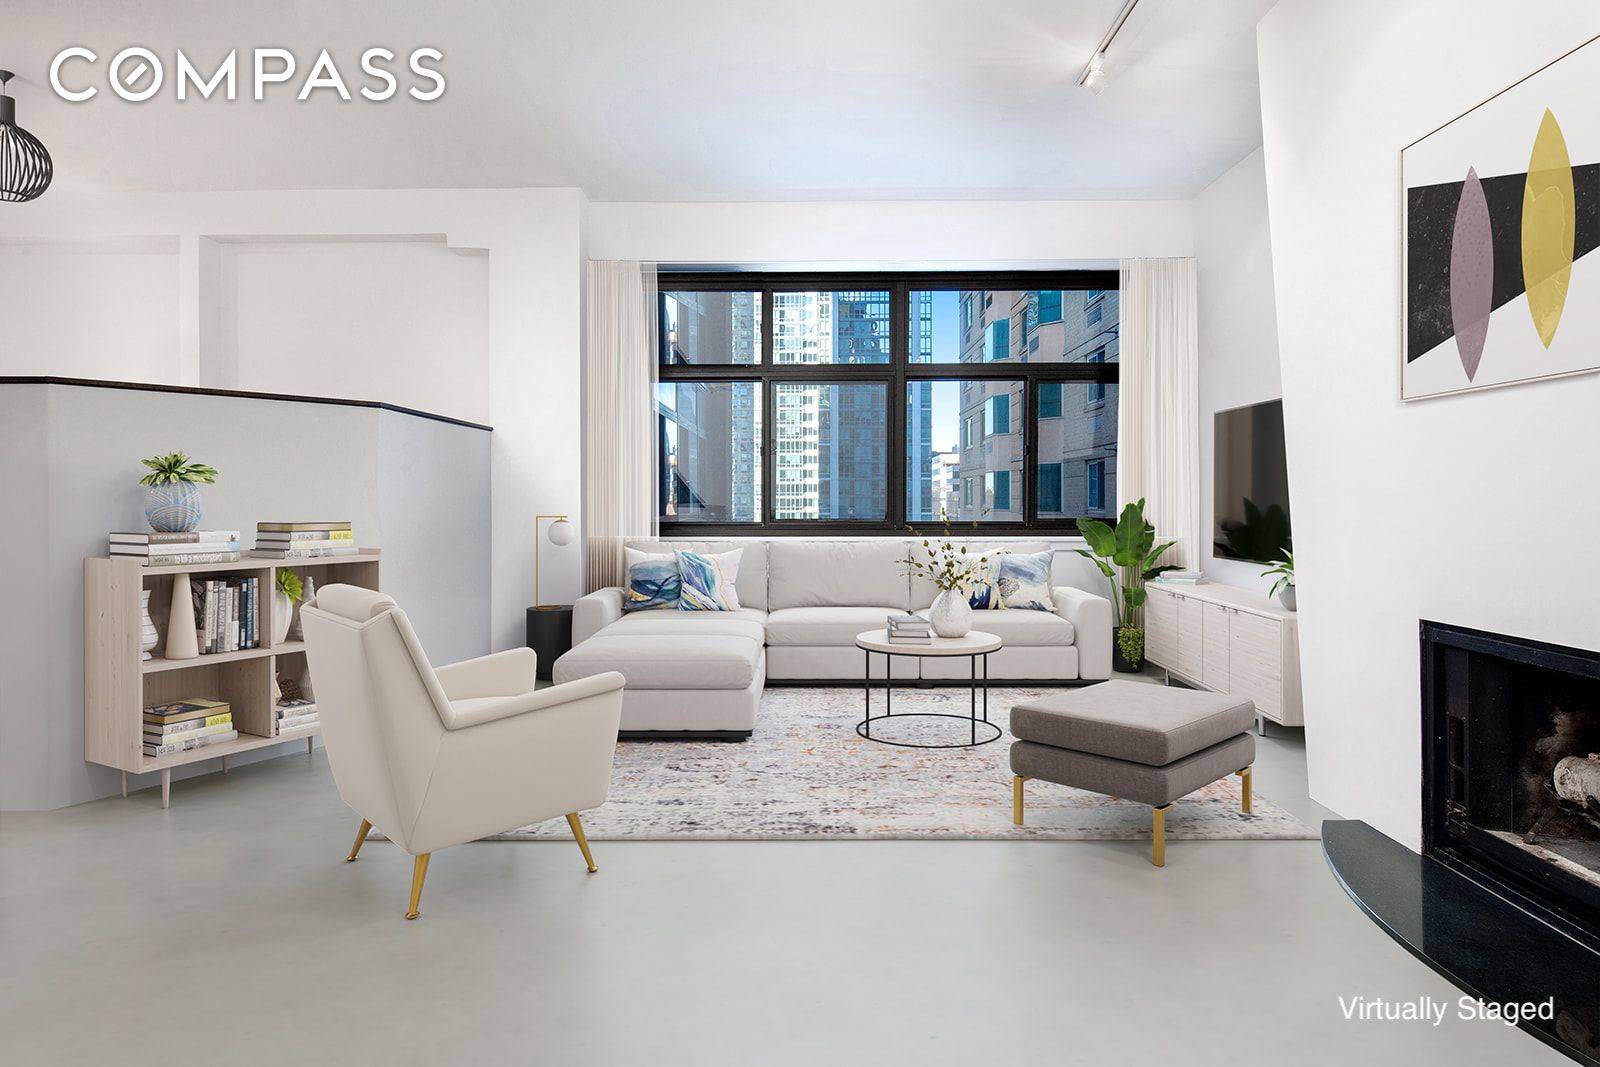 PRICE DROP ! The Armory Hell's Kitchen One Bedroom Loft Flexible Floor Plan Renovated Kitchen amp ; Bath Apt Features Open Flexible Floor Plan with Endless Possibilities Oversized Windows with ...